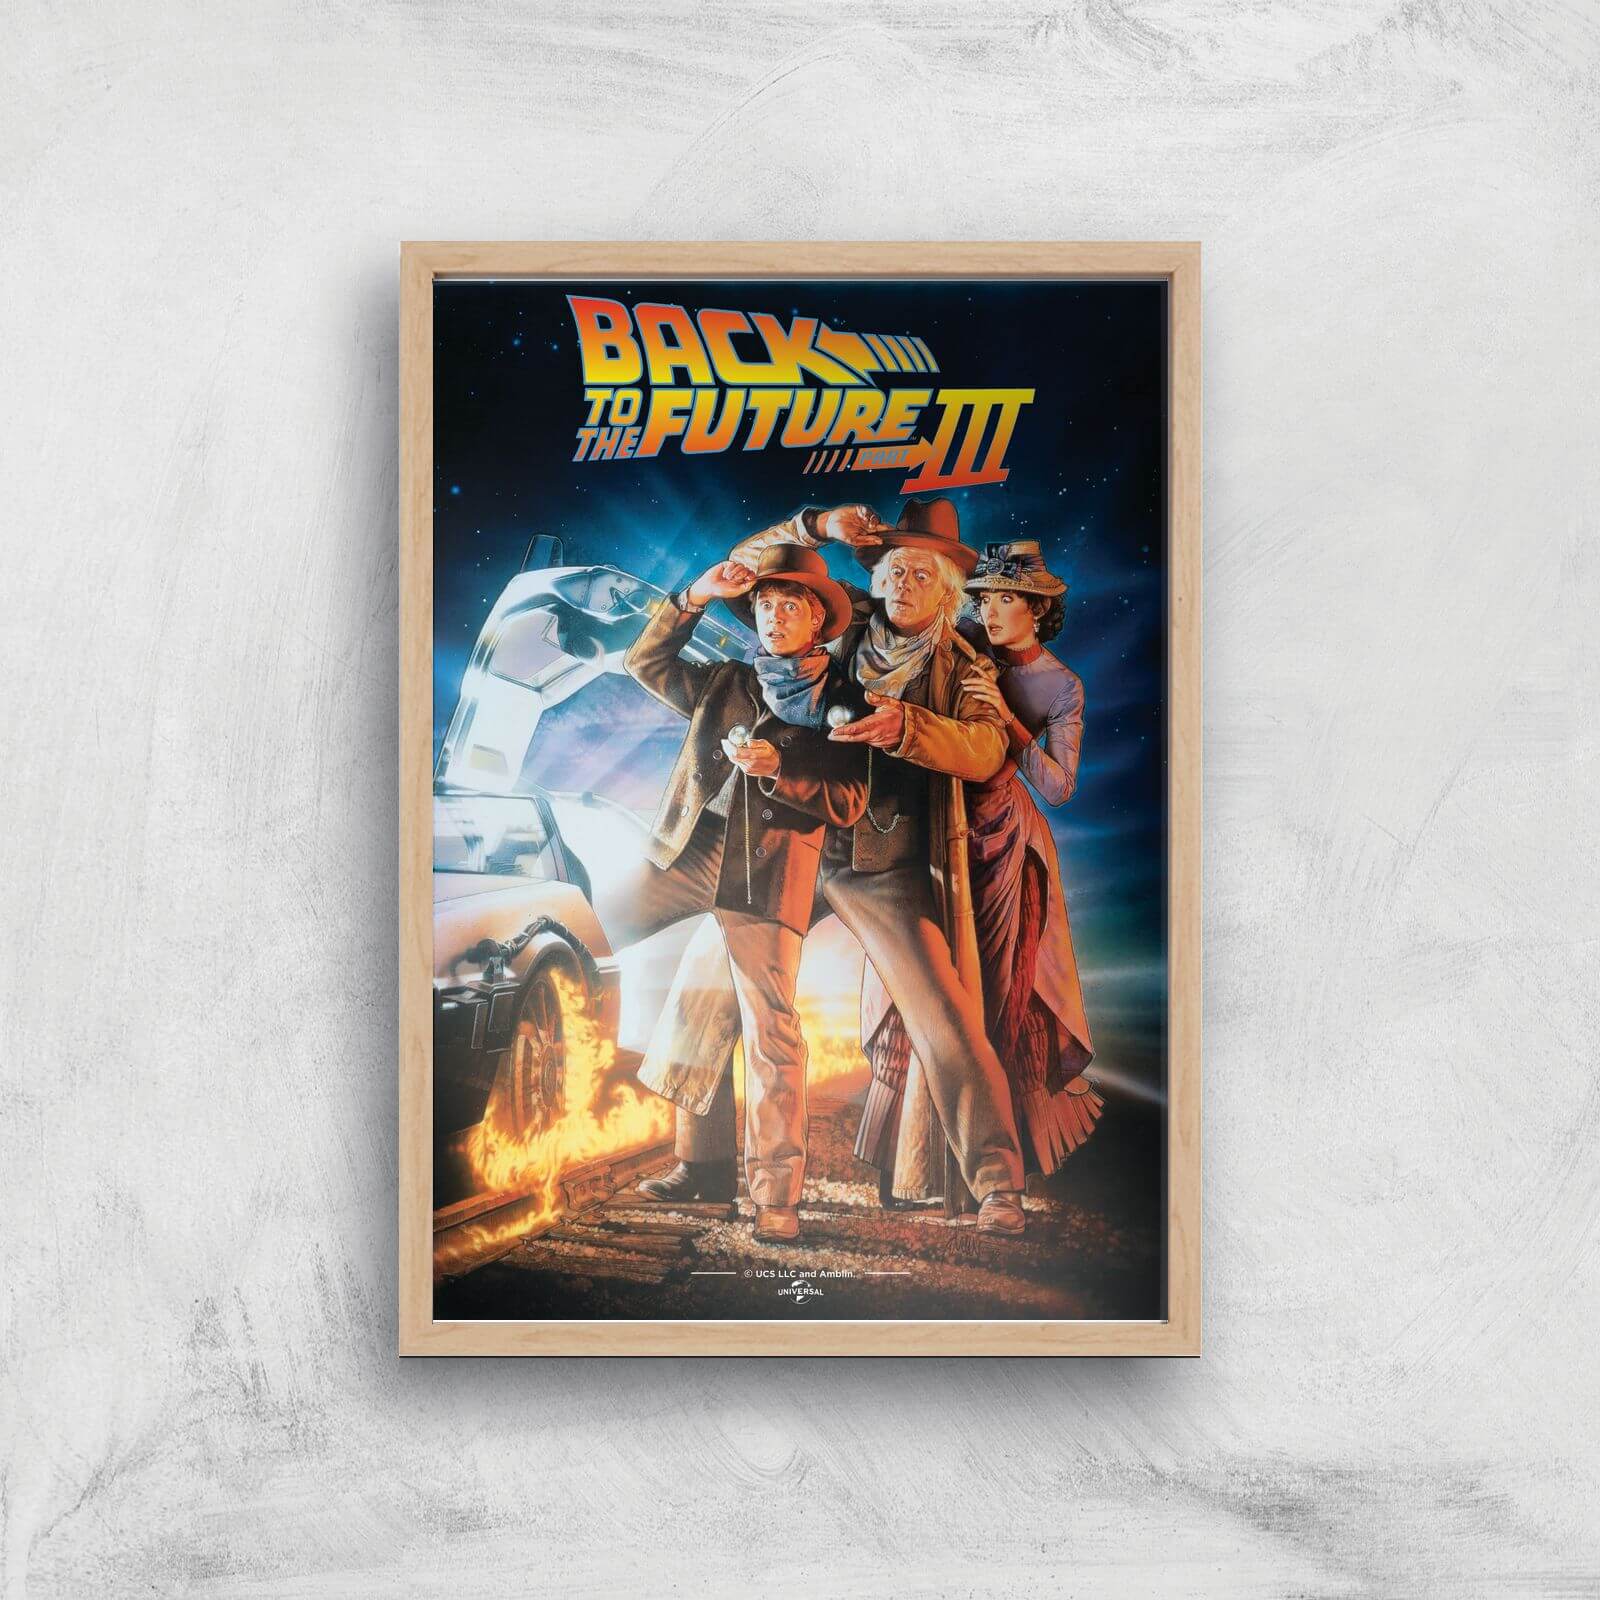 Back To The Future Part 3 Giclee Art Print - A4 - Wooden Frame